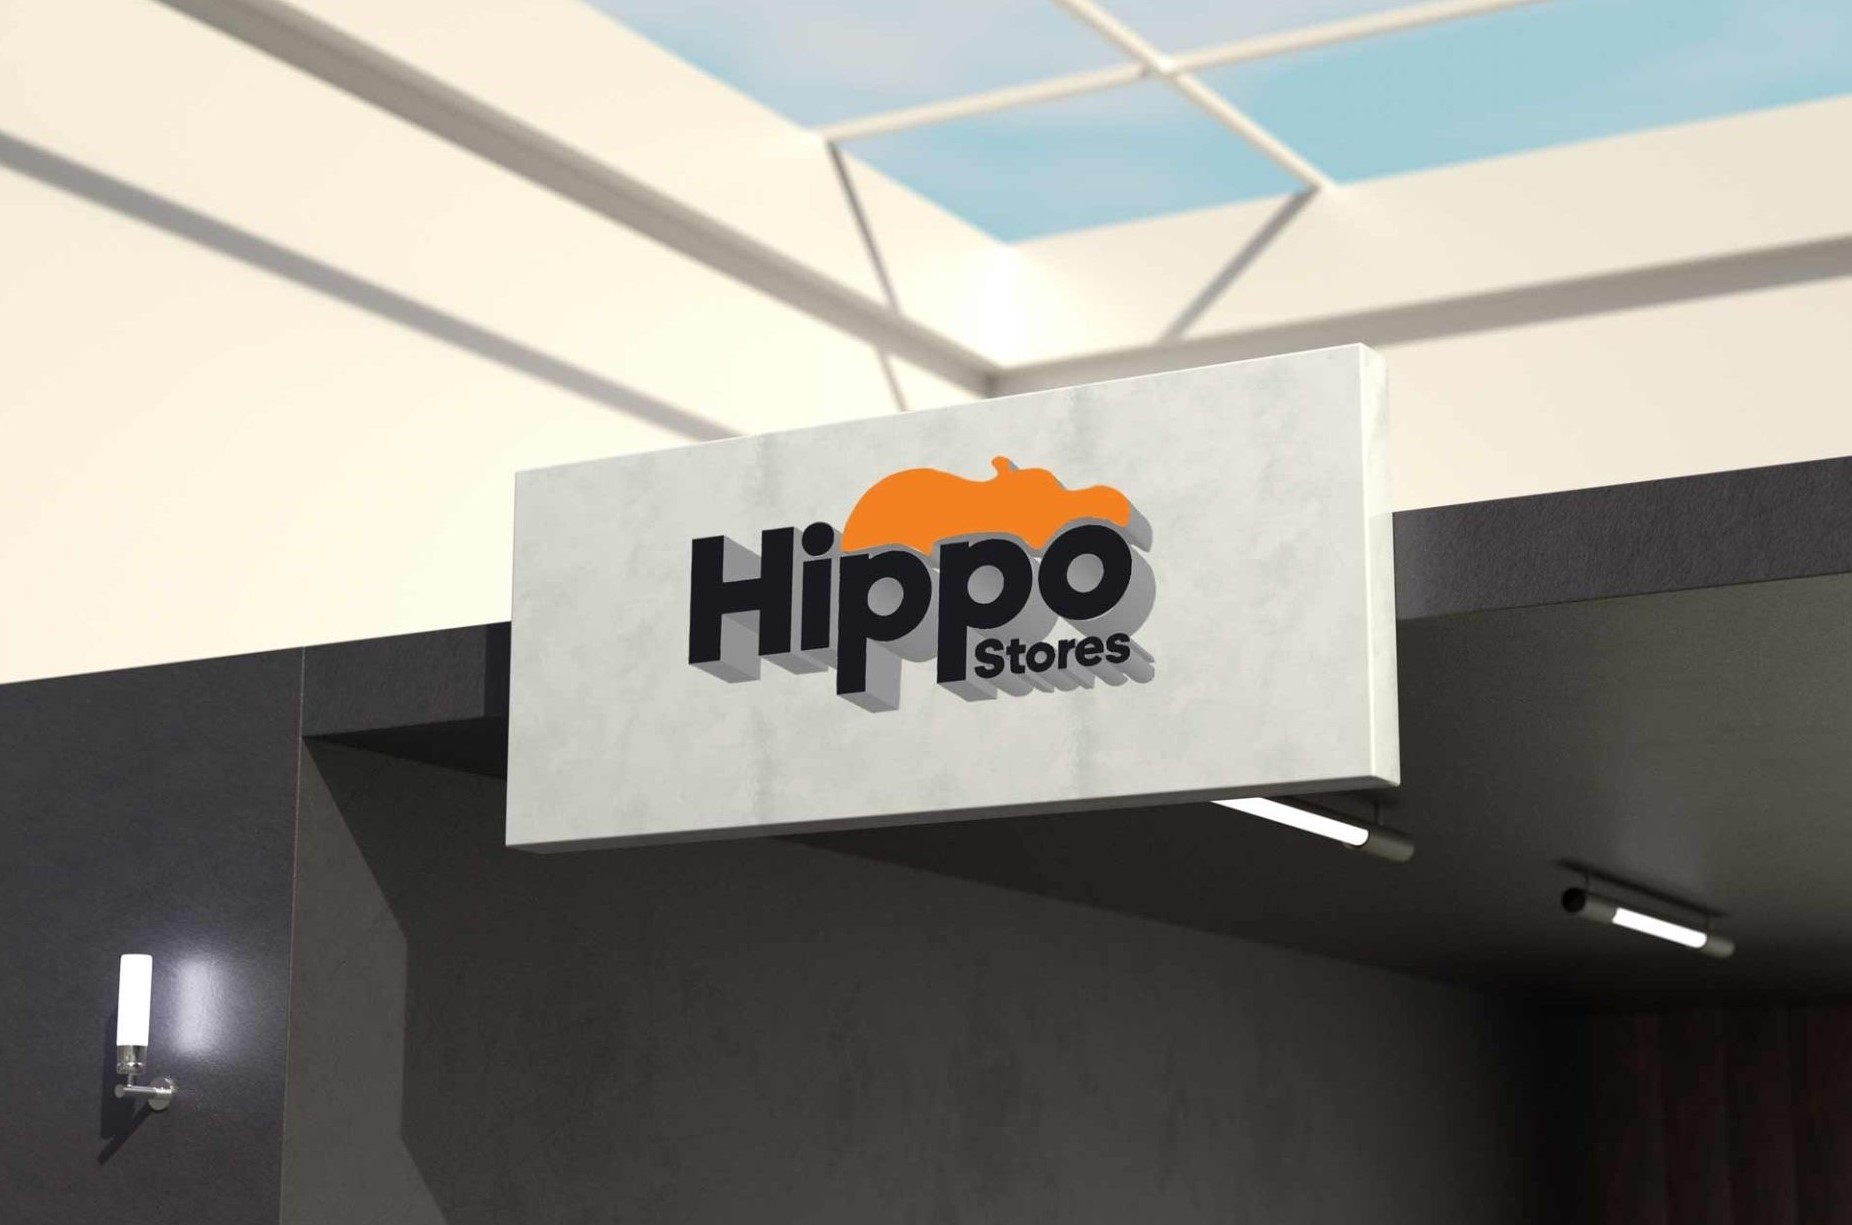 Hippo Stores Launched By Apppl Combine